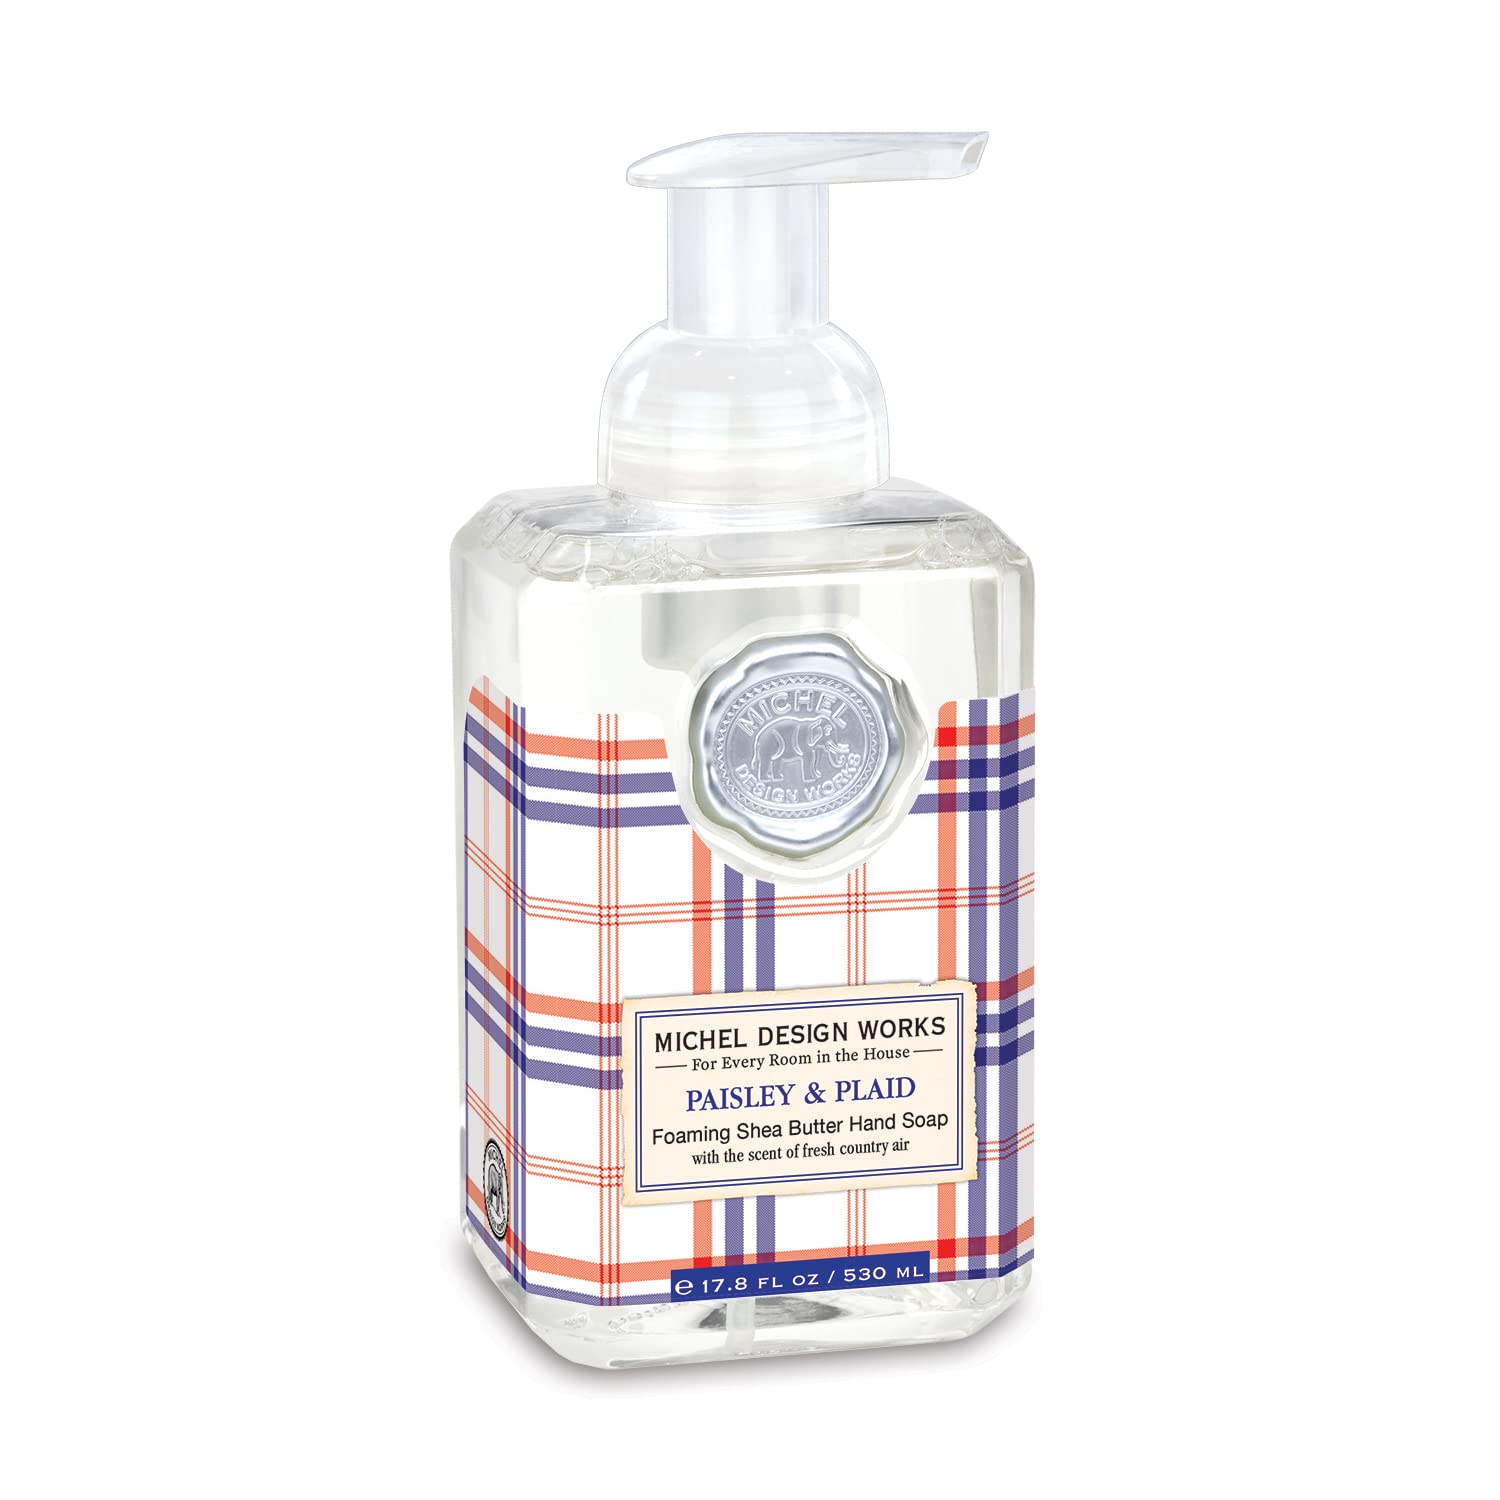 Michel Design Works Foaming Hand Soap, Paisley & Plaid (Red, White, and Blue Plaid Design)